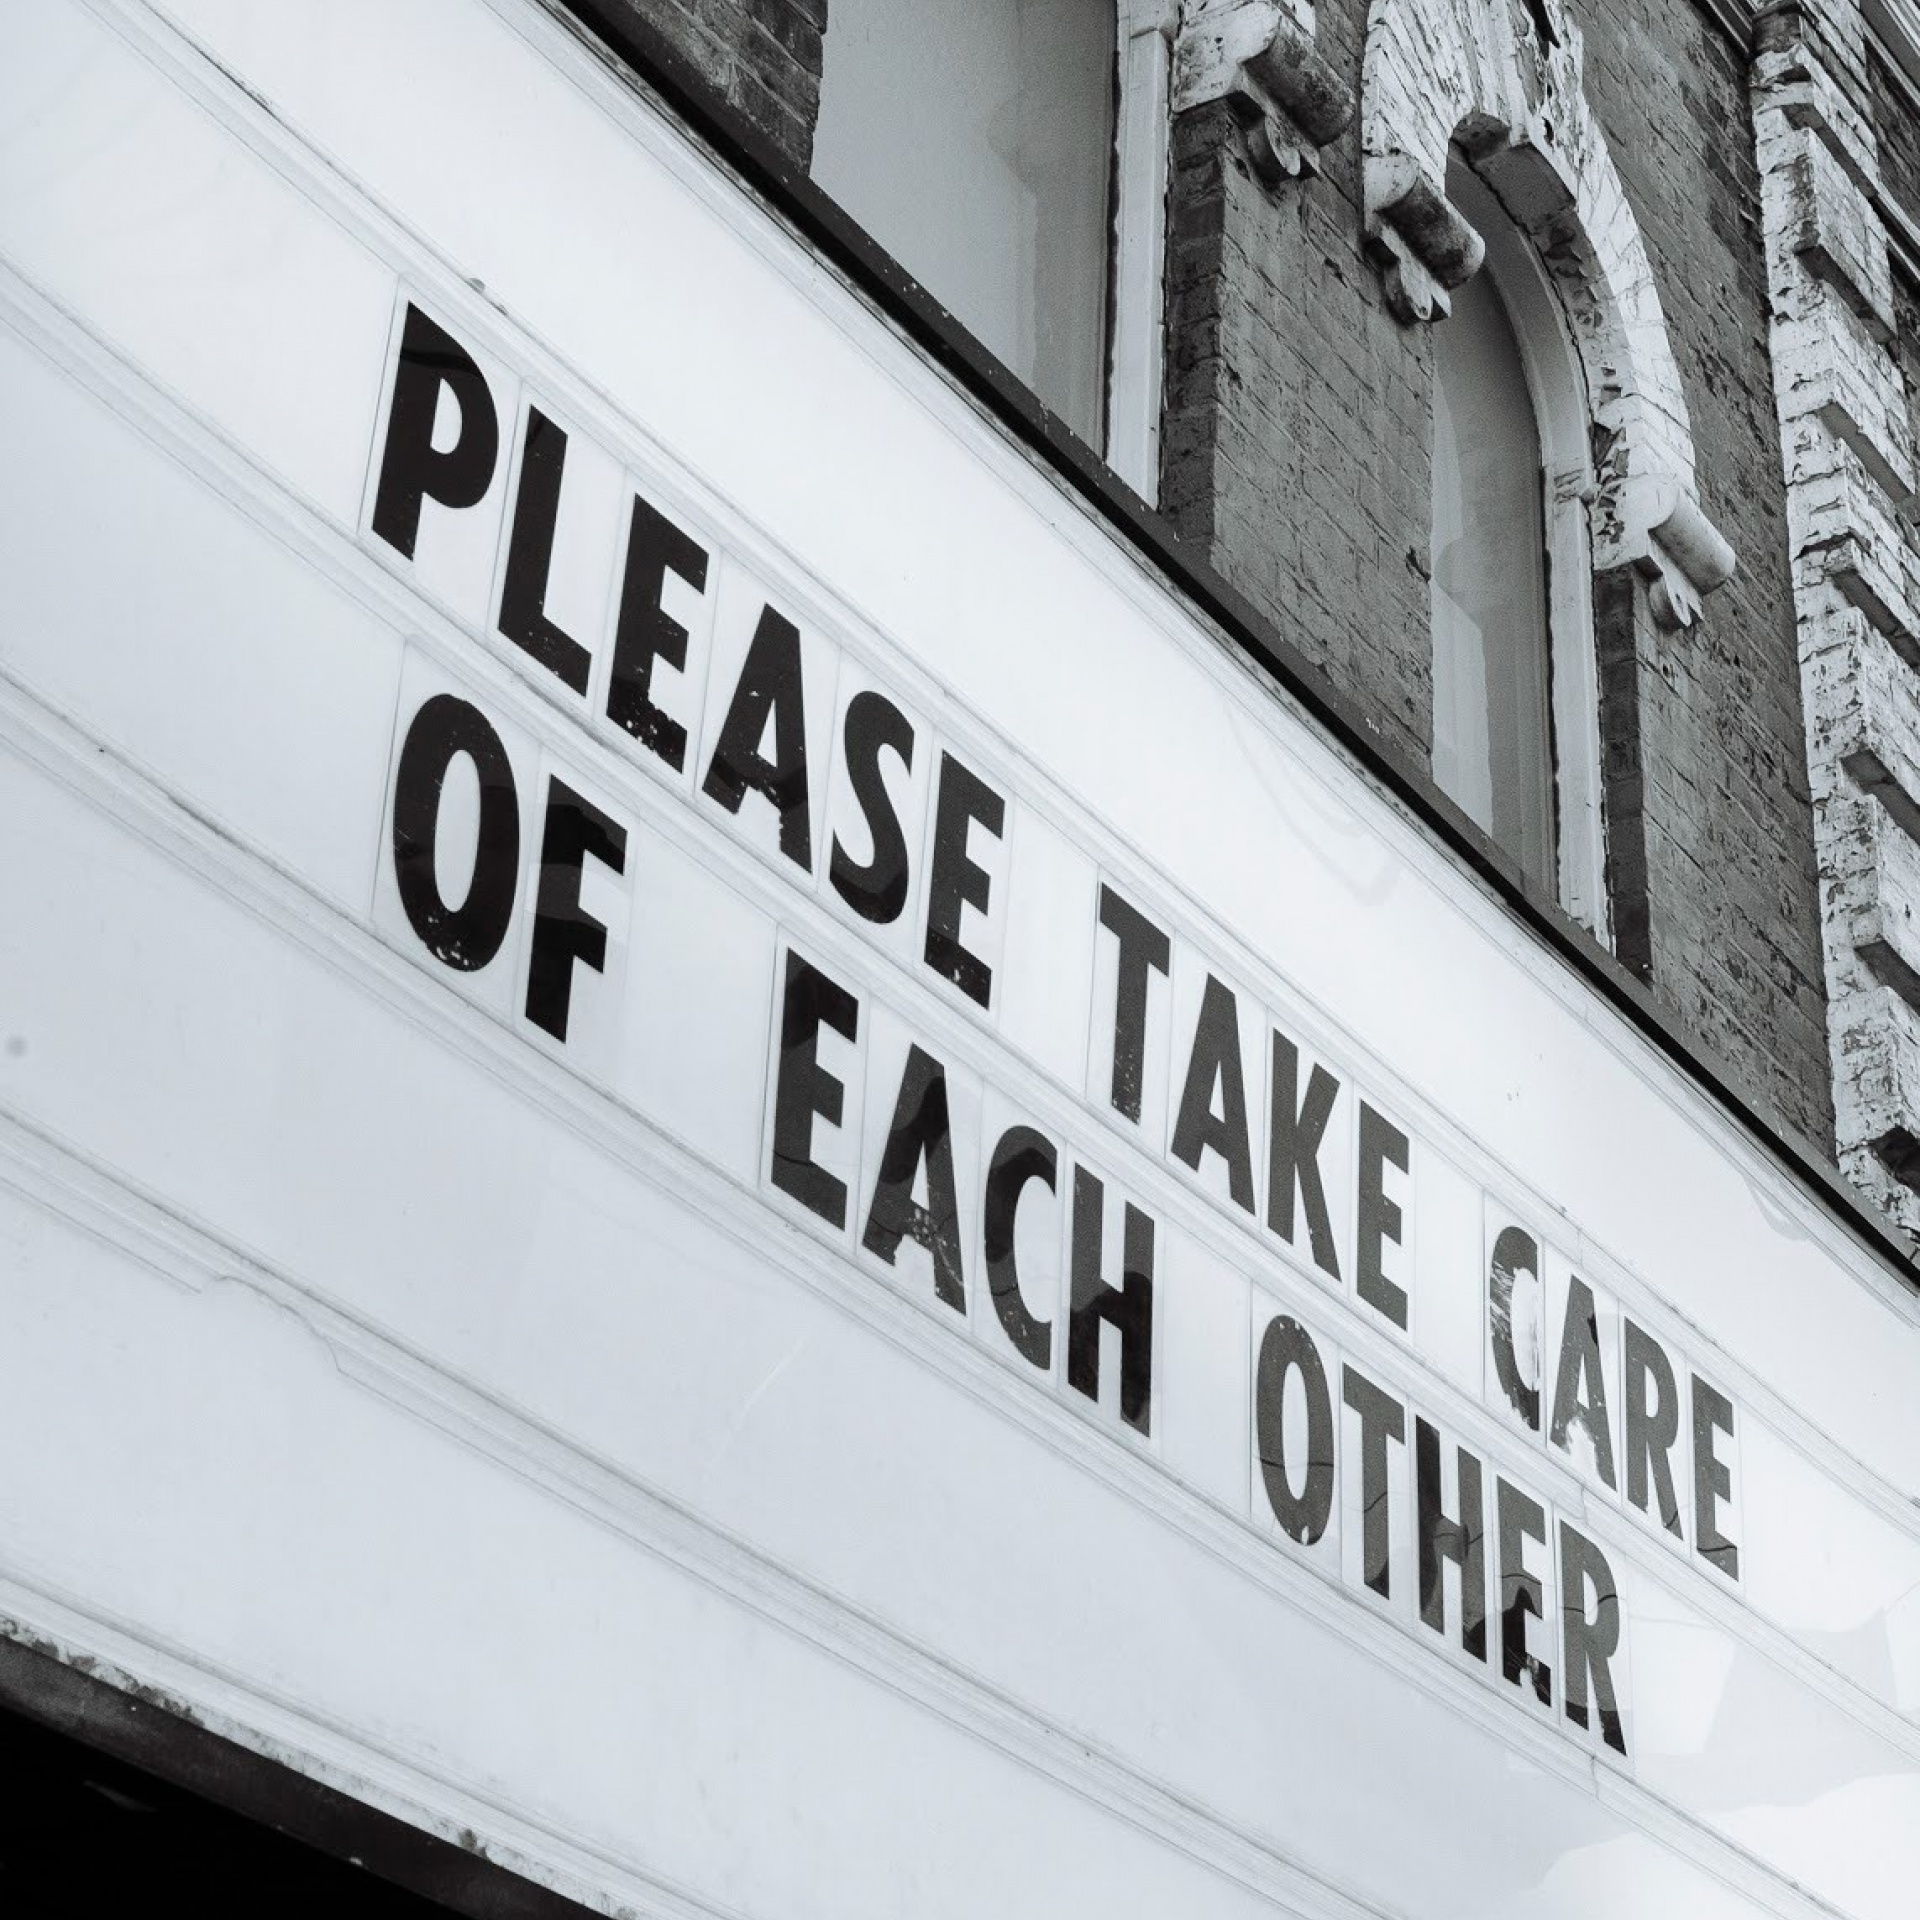 Marquee Sign that reads "Please Take Care of Each Other".